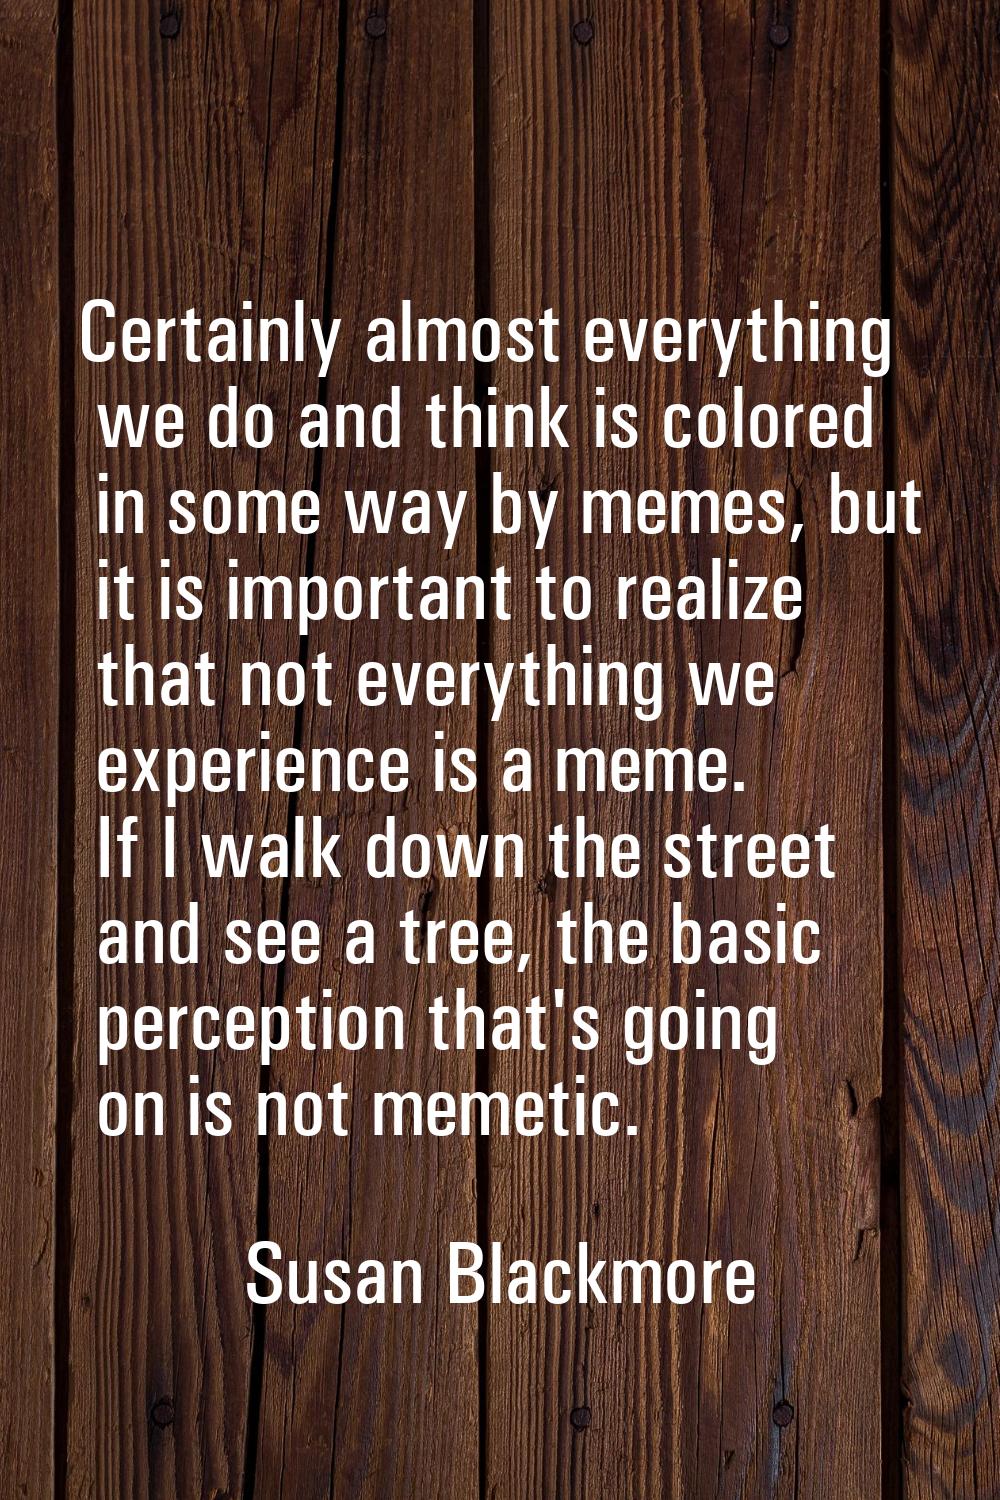 Certainly almost everything we do and think is colored in some way by memes, but it is important to